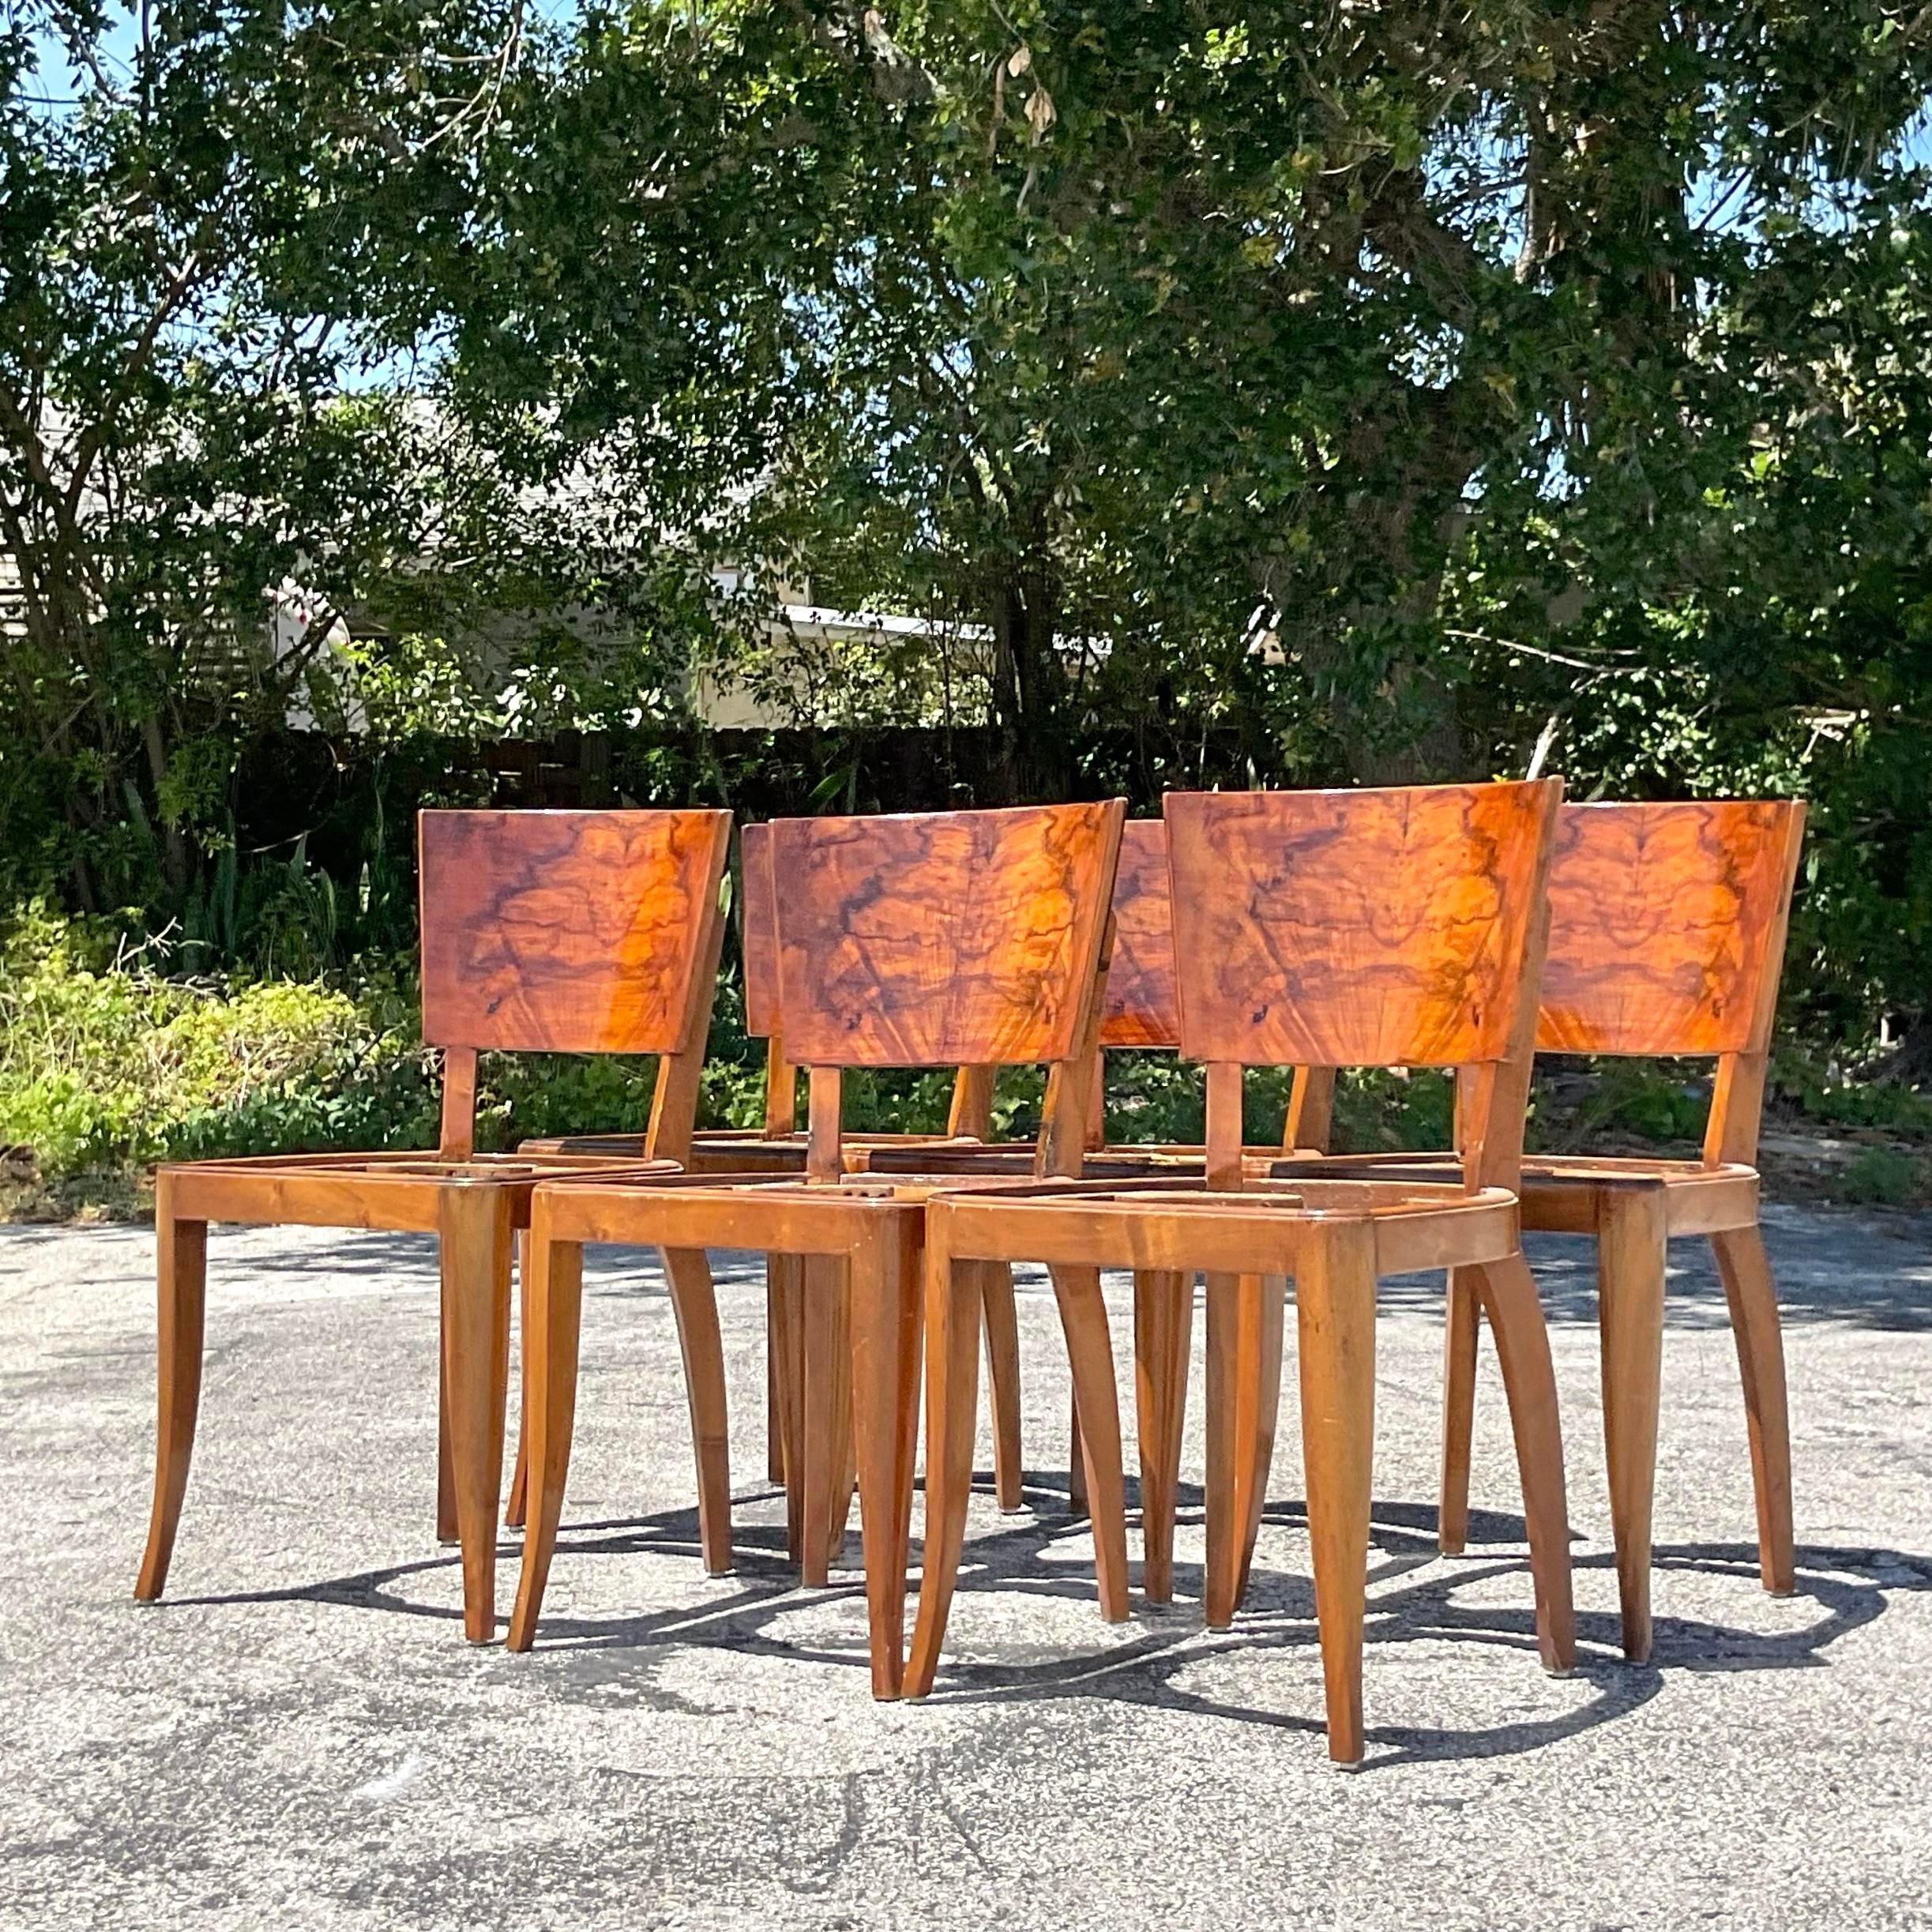 Upholstery Vintage Deco Burl Wood Dining Chairs - Set of 6